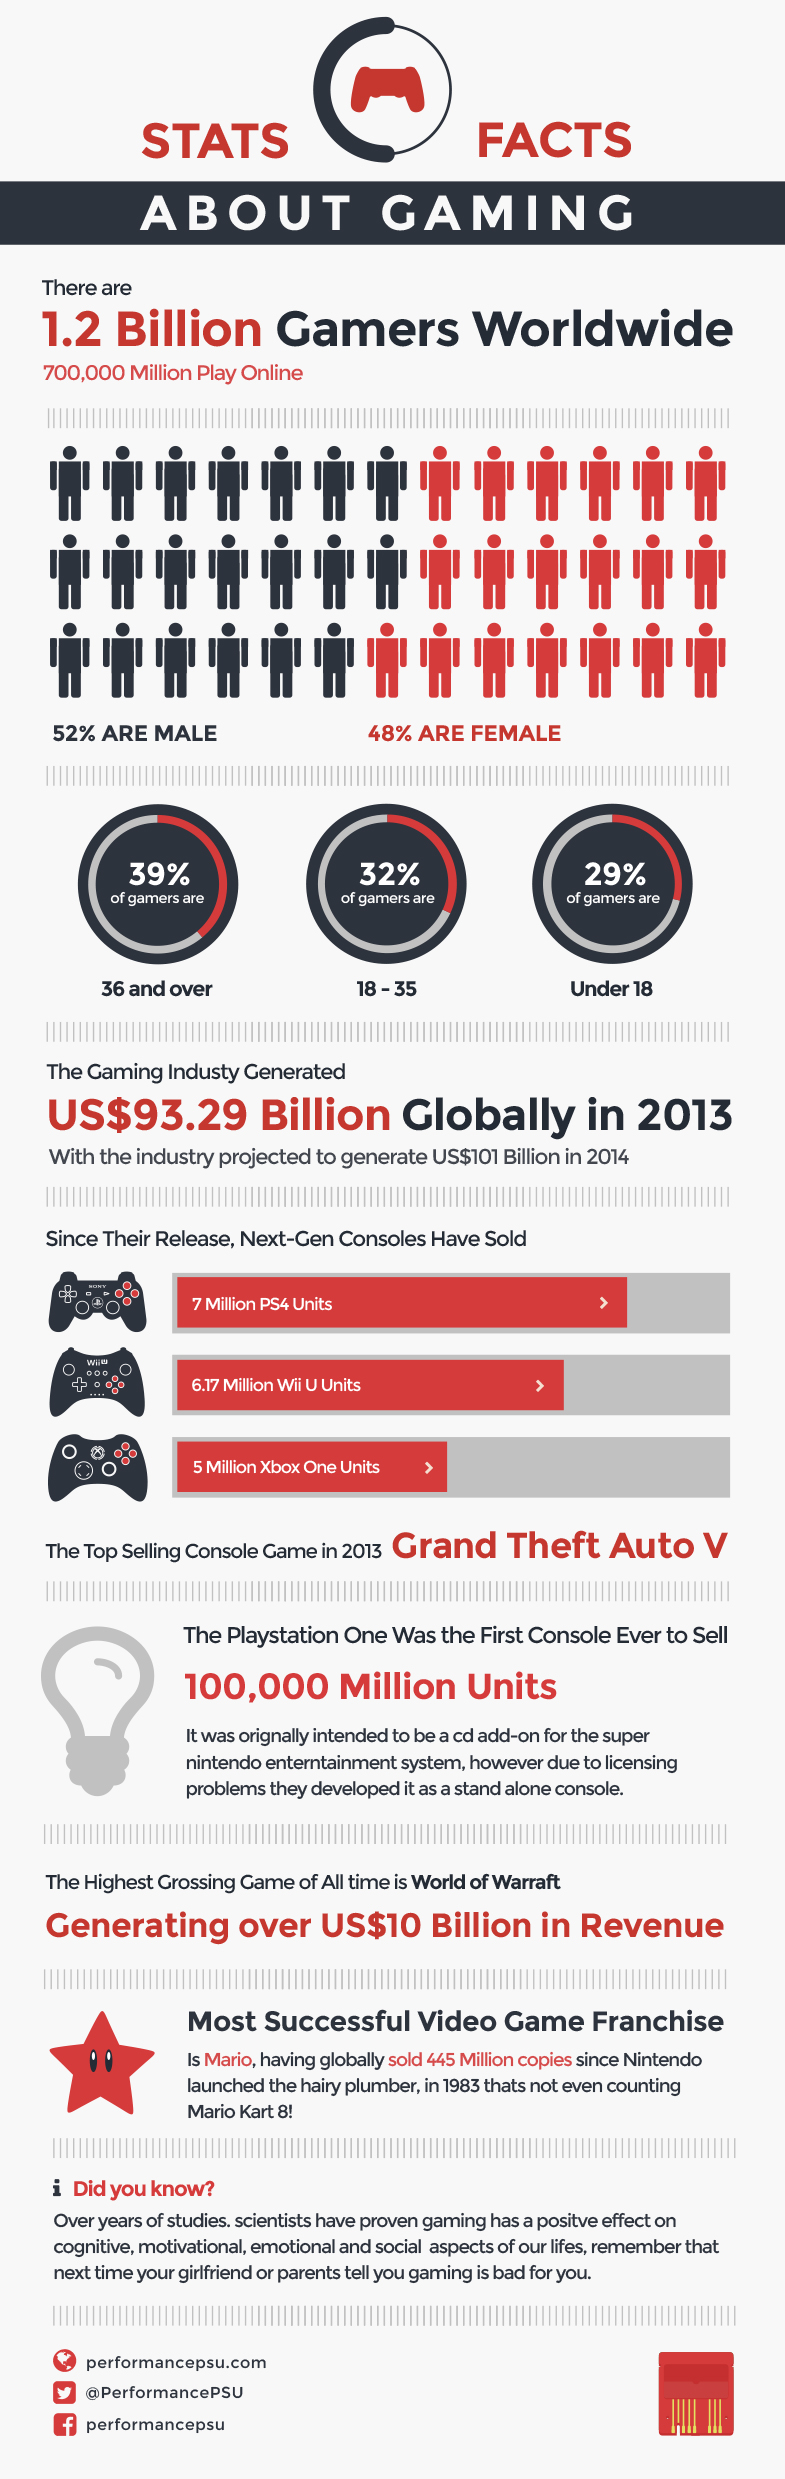 Statistics & Facts about the Gaming Industry infographic